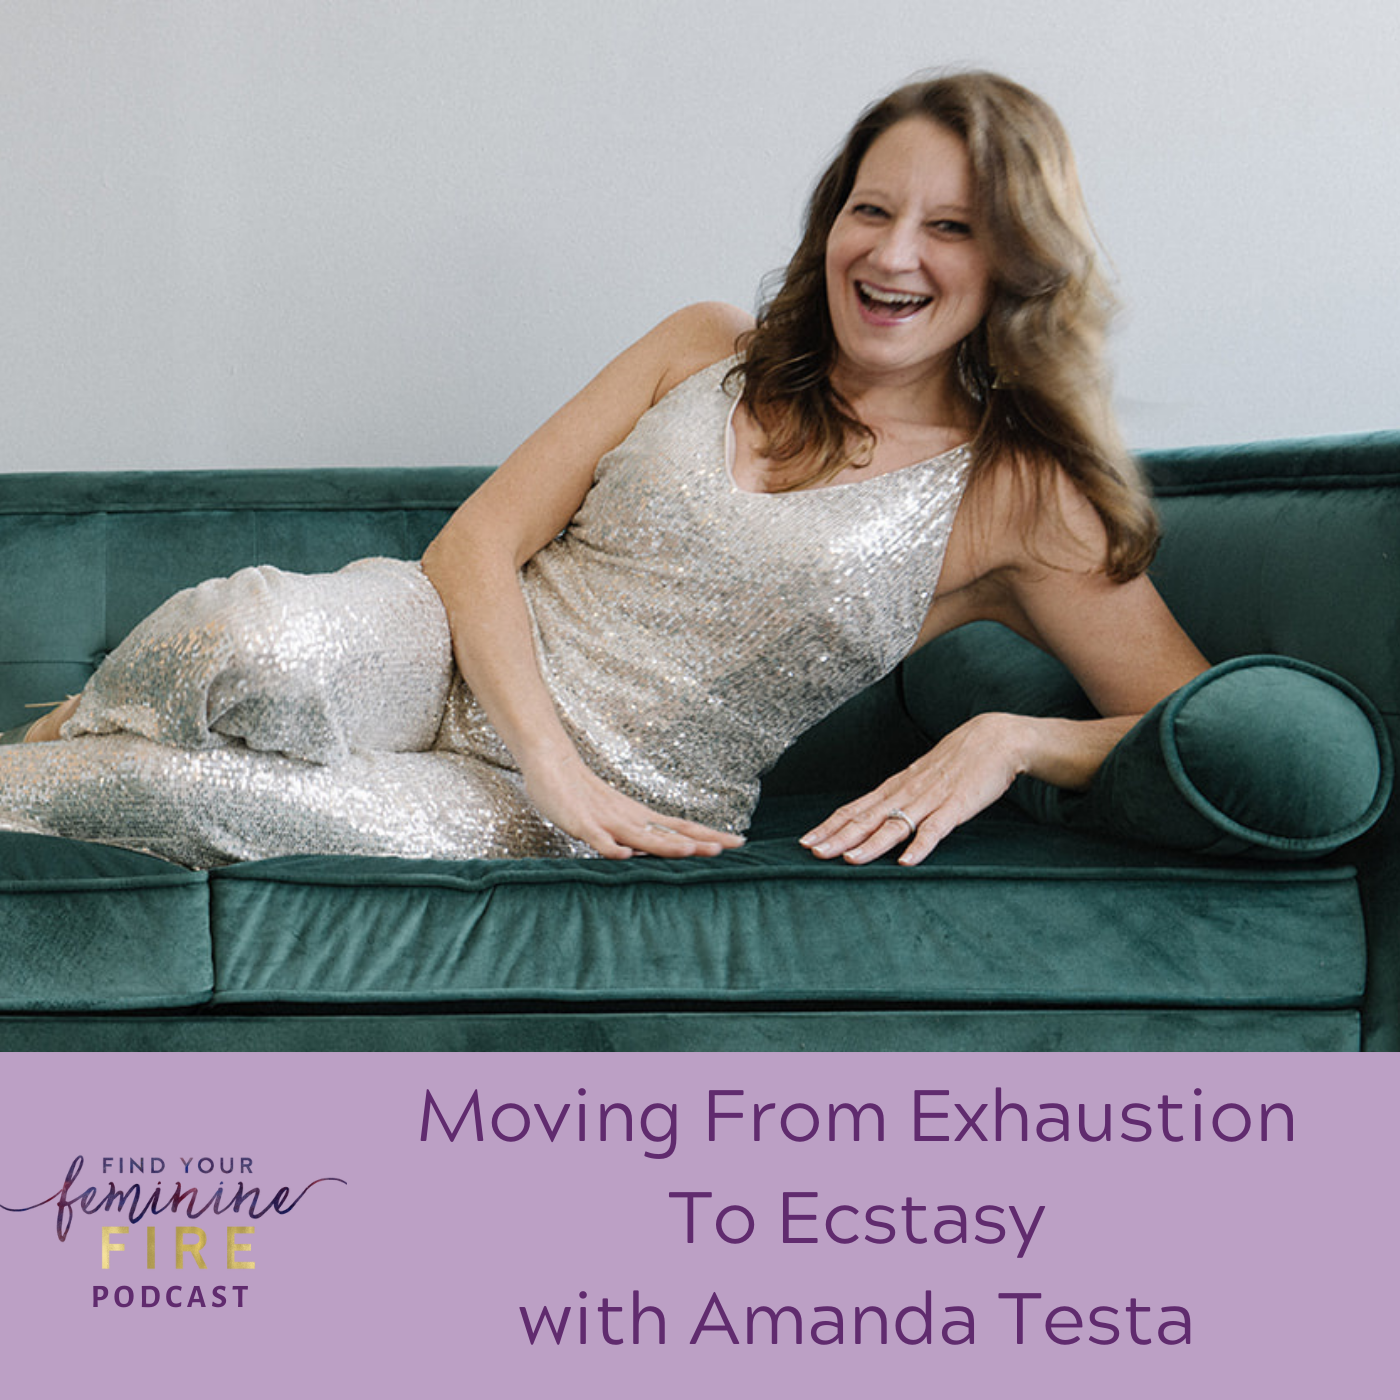 Moving From Exhaustion To Ecstasy with Amanda Testa